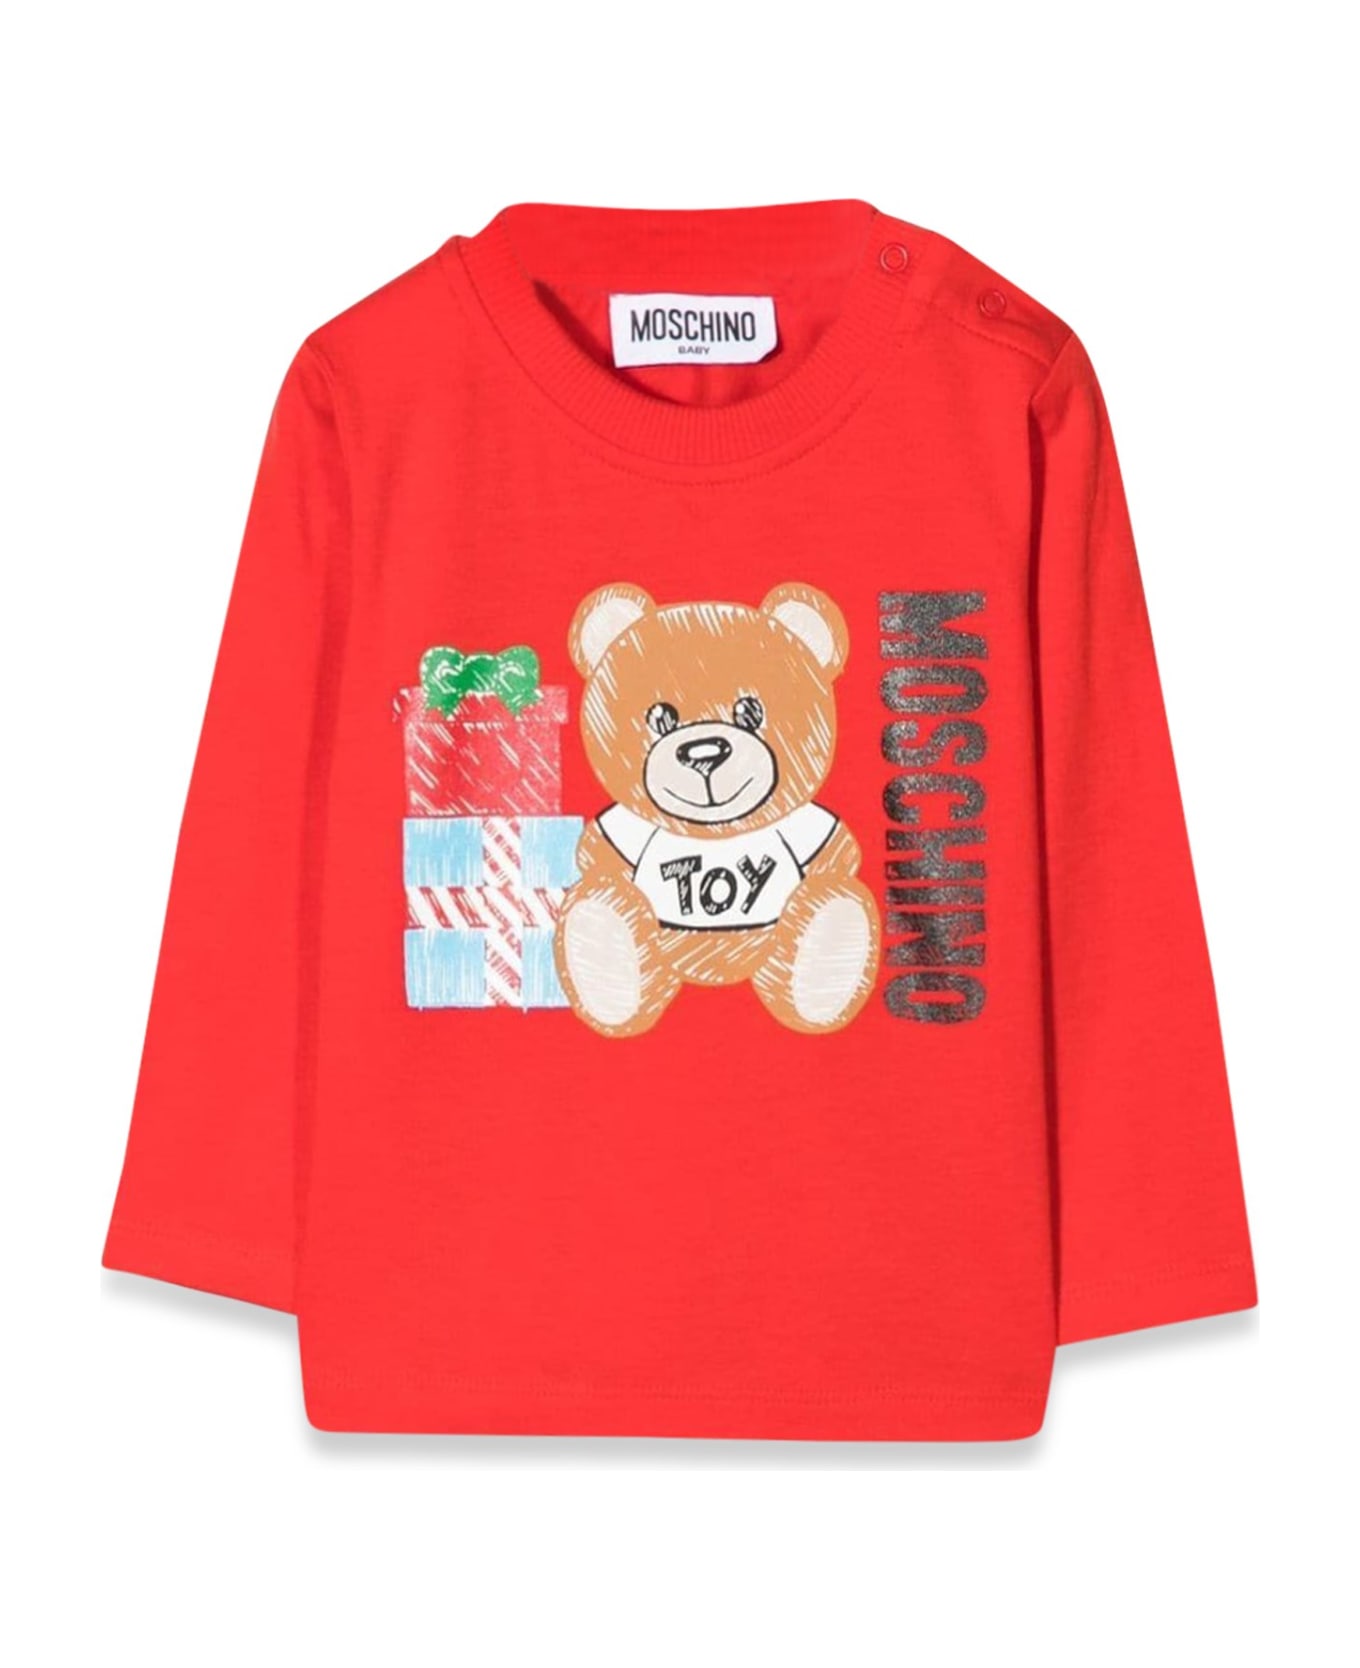 Moschino T-shirt M/l Teddy Bear Gifts - ROSSO